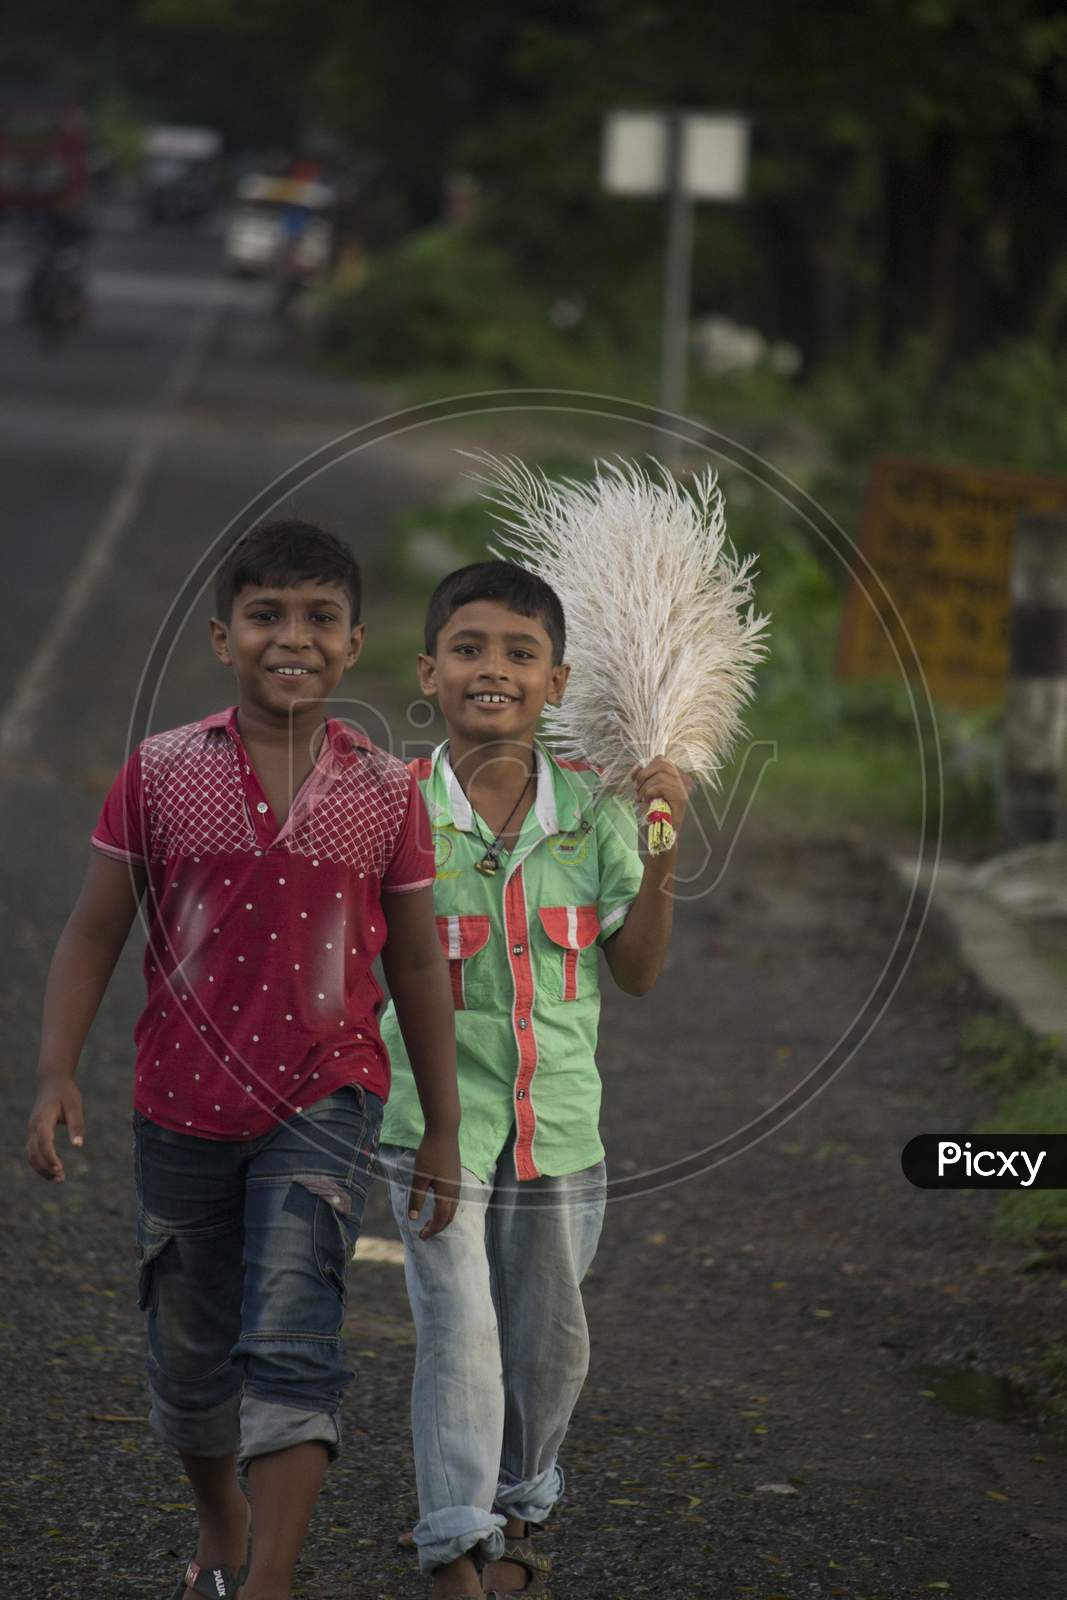 May 06 2019, Barisal, Bangladesh. The Children Of The Village Are Carrying Cashew Flowers In Their Hands